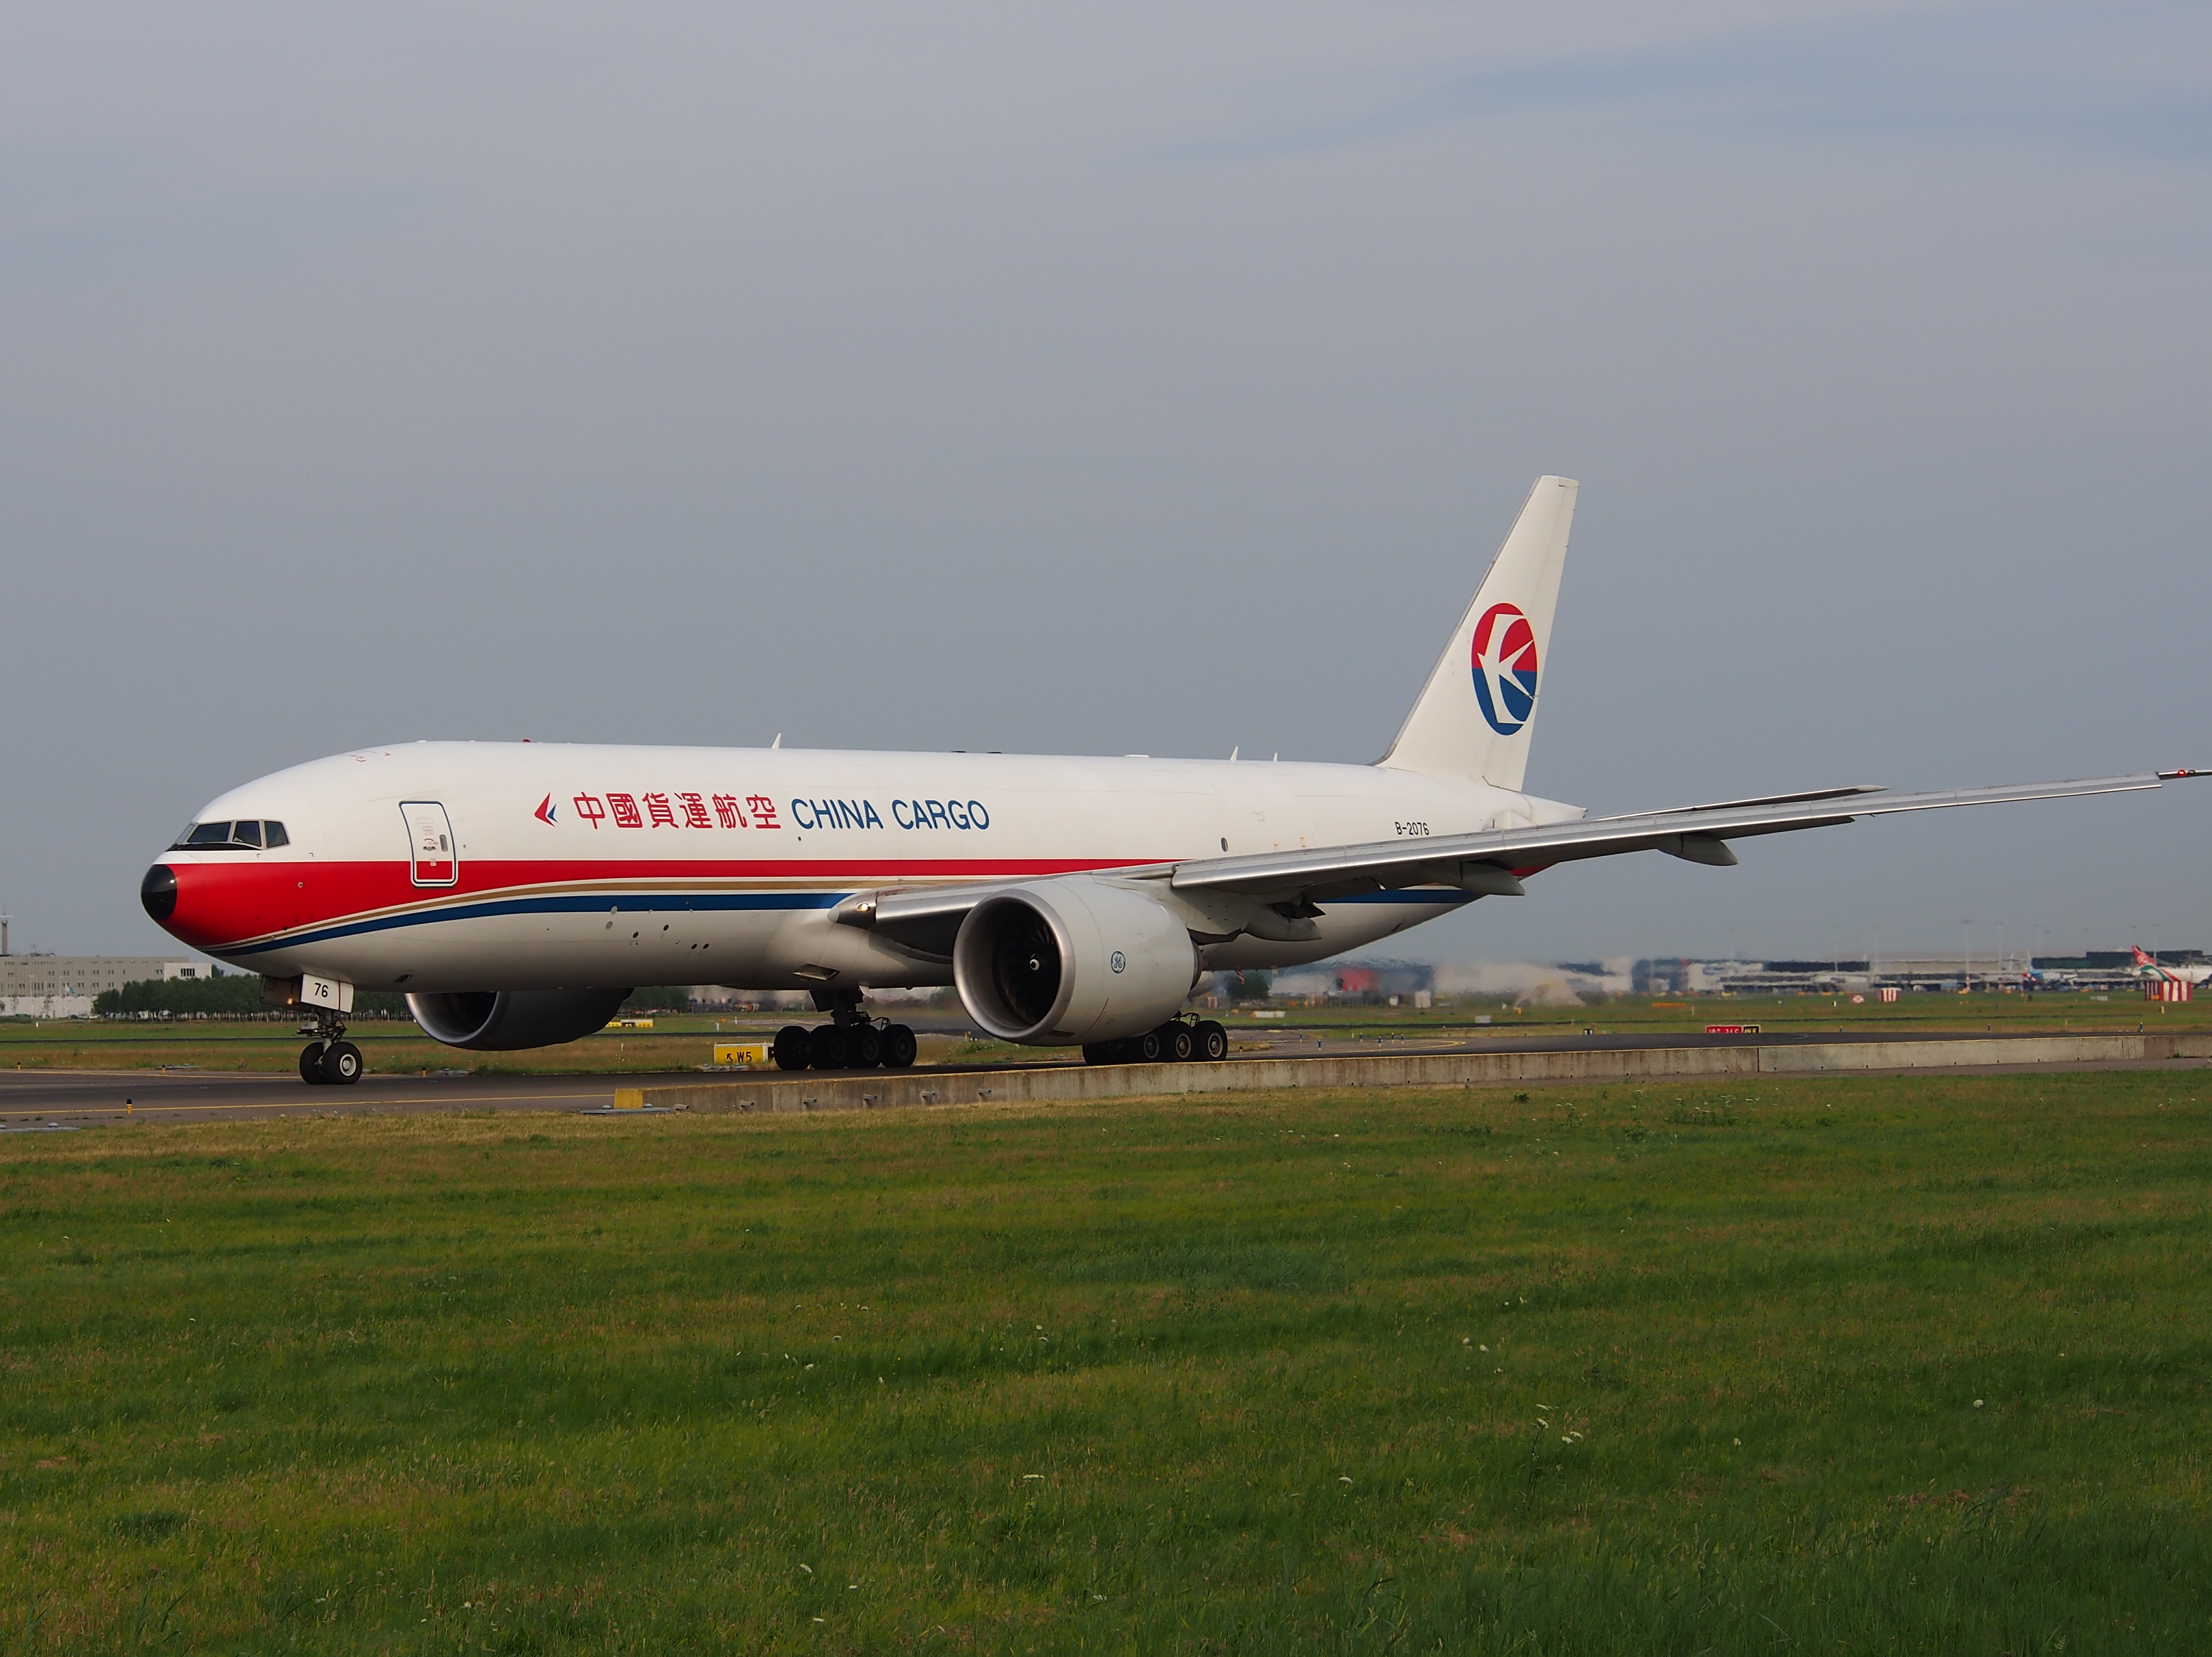 B-2076 China Cargo Airlines Boeing 777-F6N - cn 37711, taxiing 22july2013 pic-005